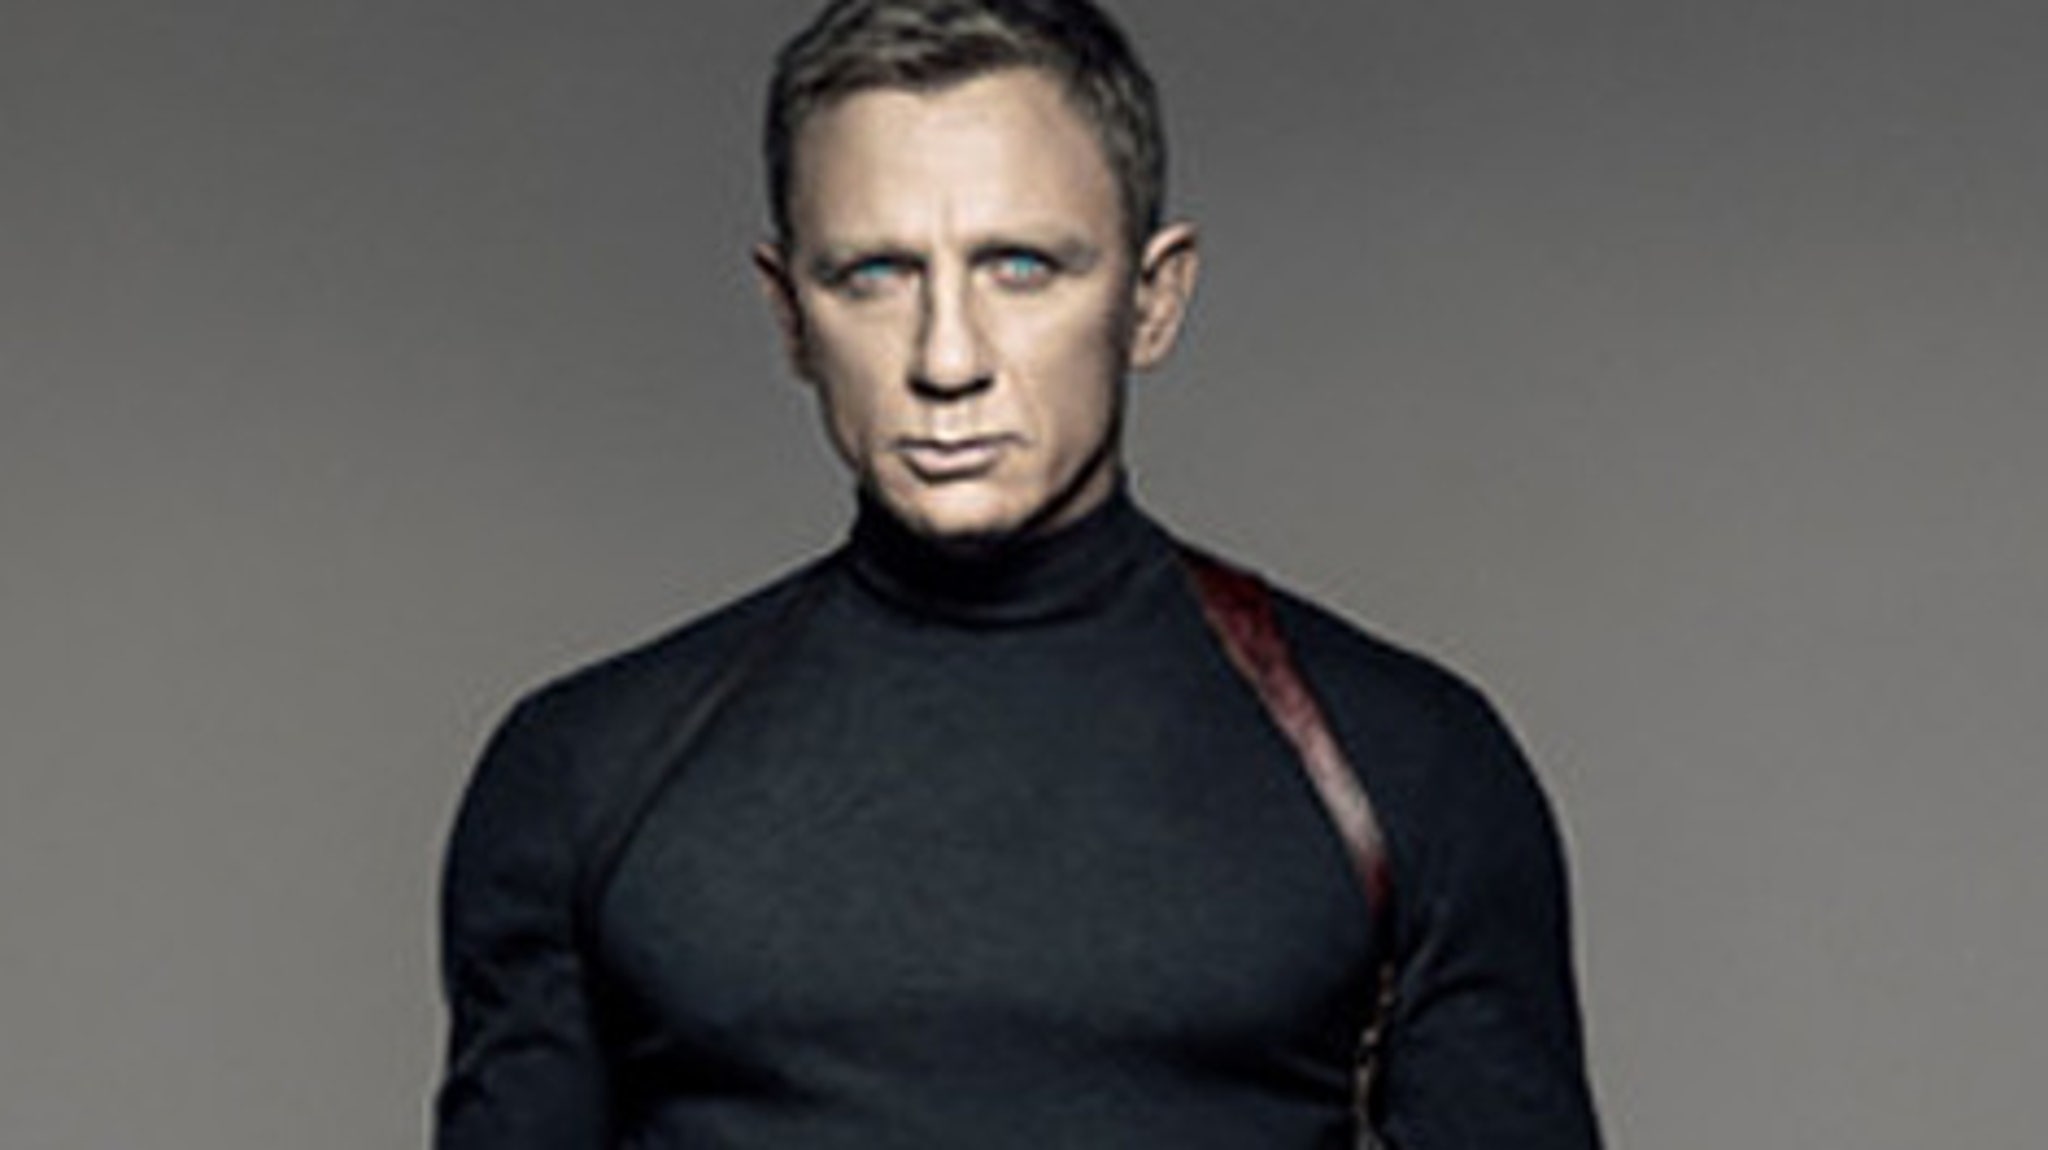 Check Out the First Teaser Trailer for the Next James Bond Film, 